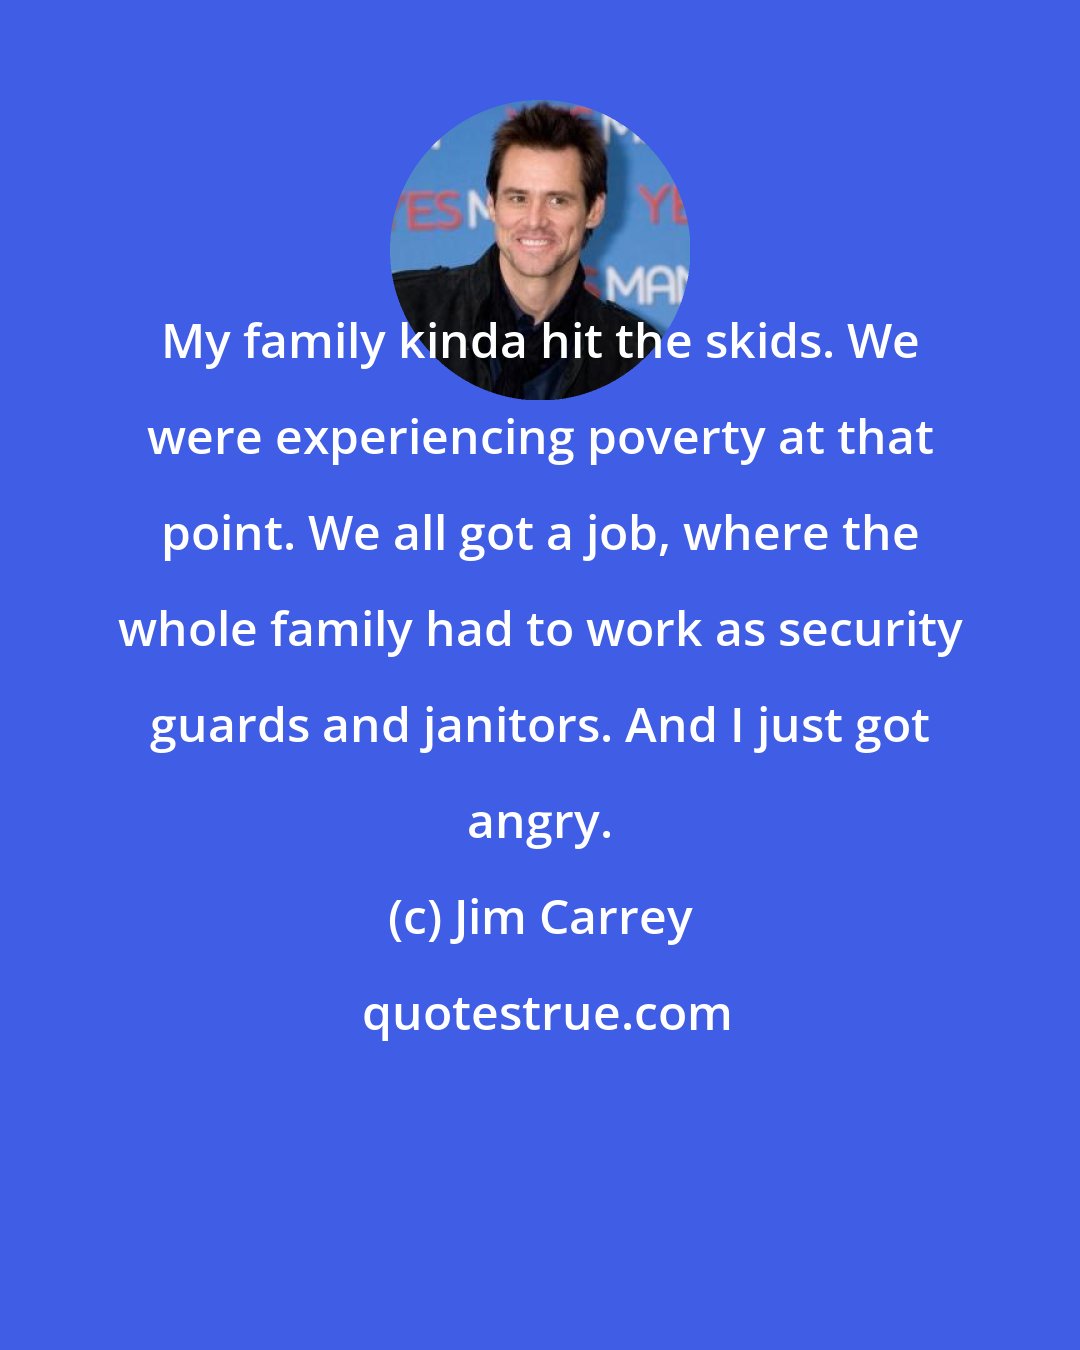 Jim Carrey: My family kinda hit the skids. We were experiencing poverty at that point. We all got a job, where the whole family had to work as security guards and janitors. And I just got angry.